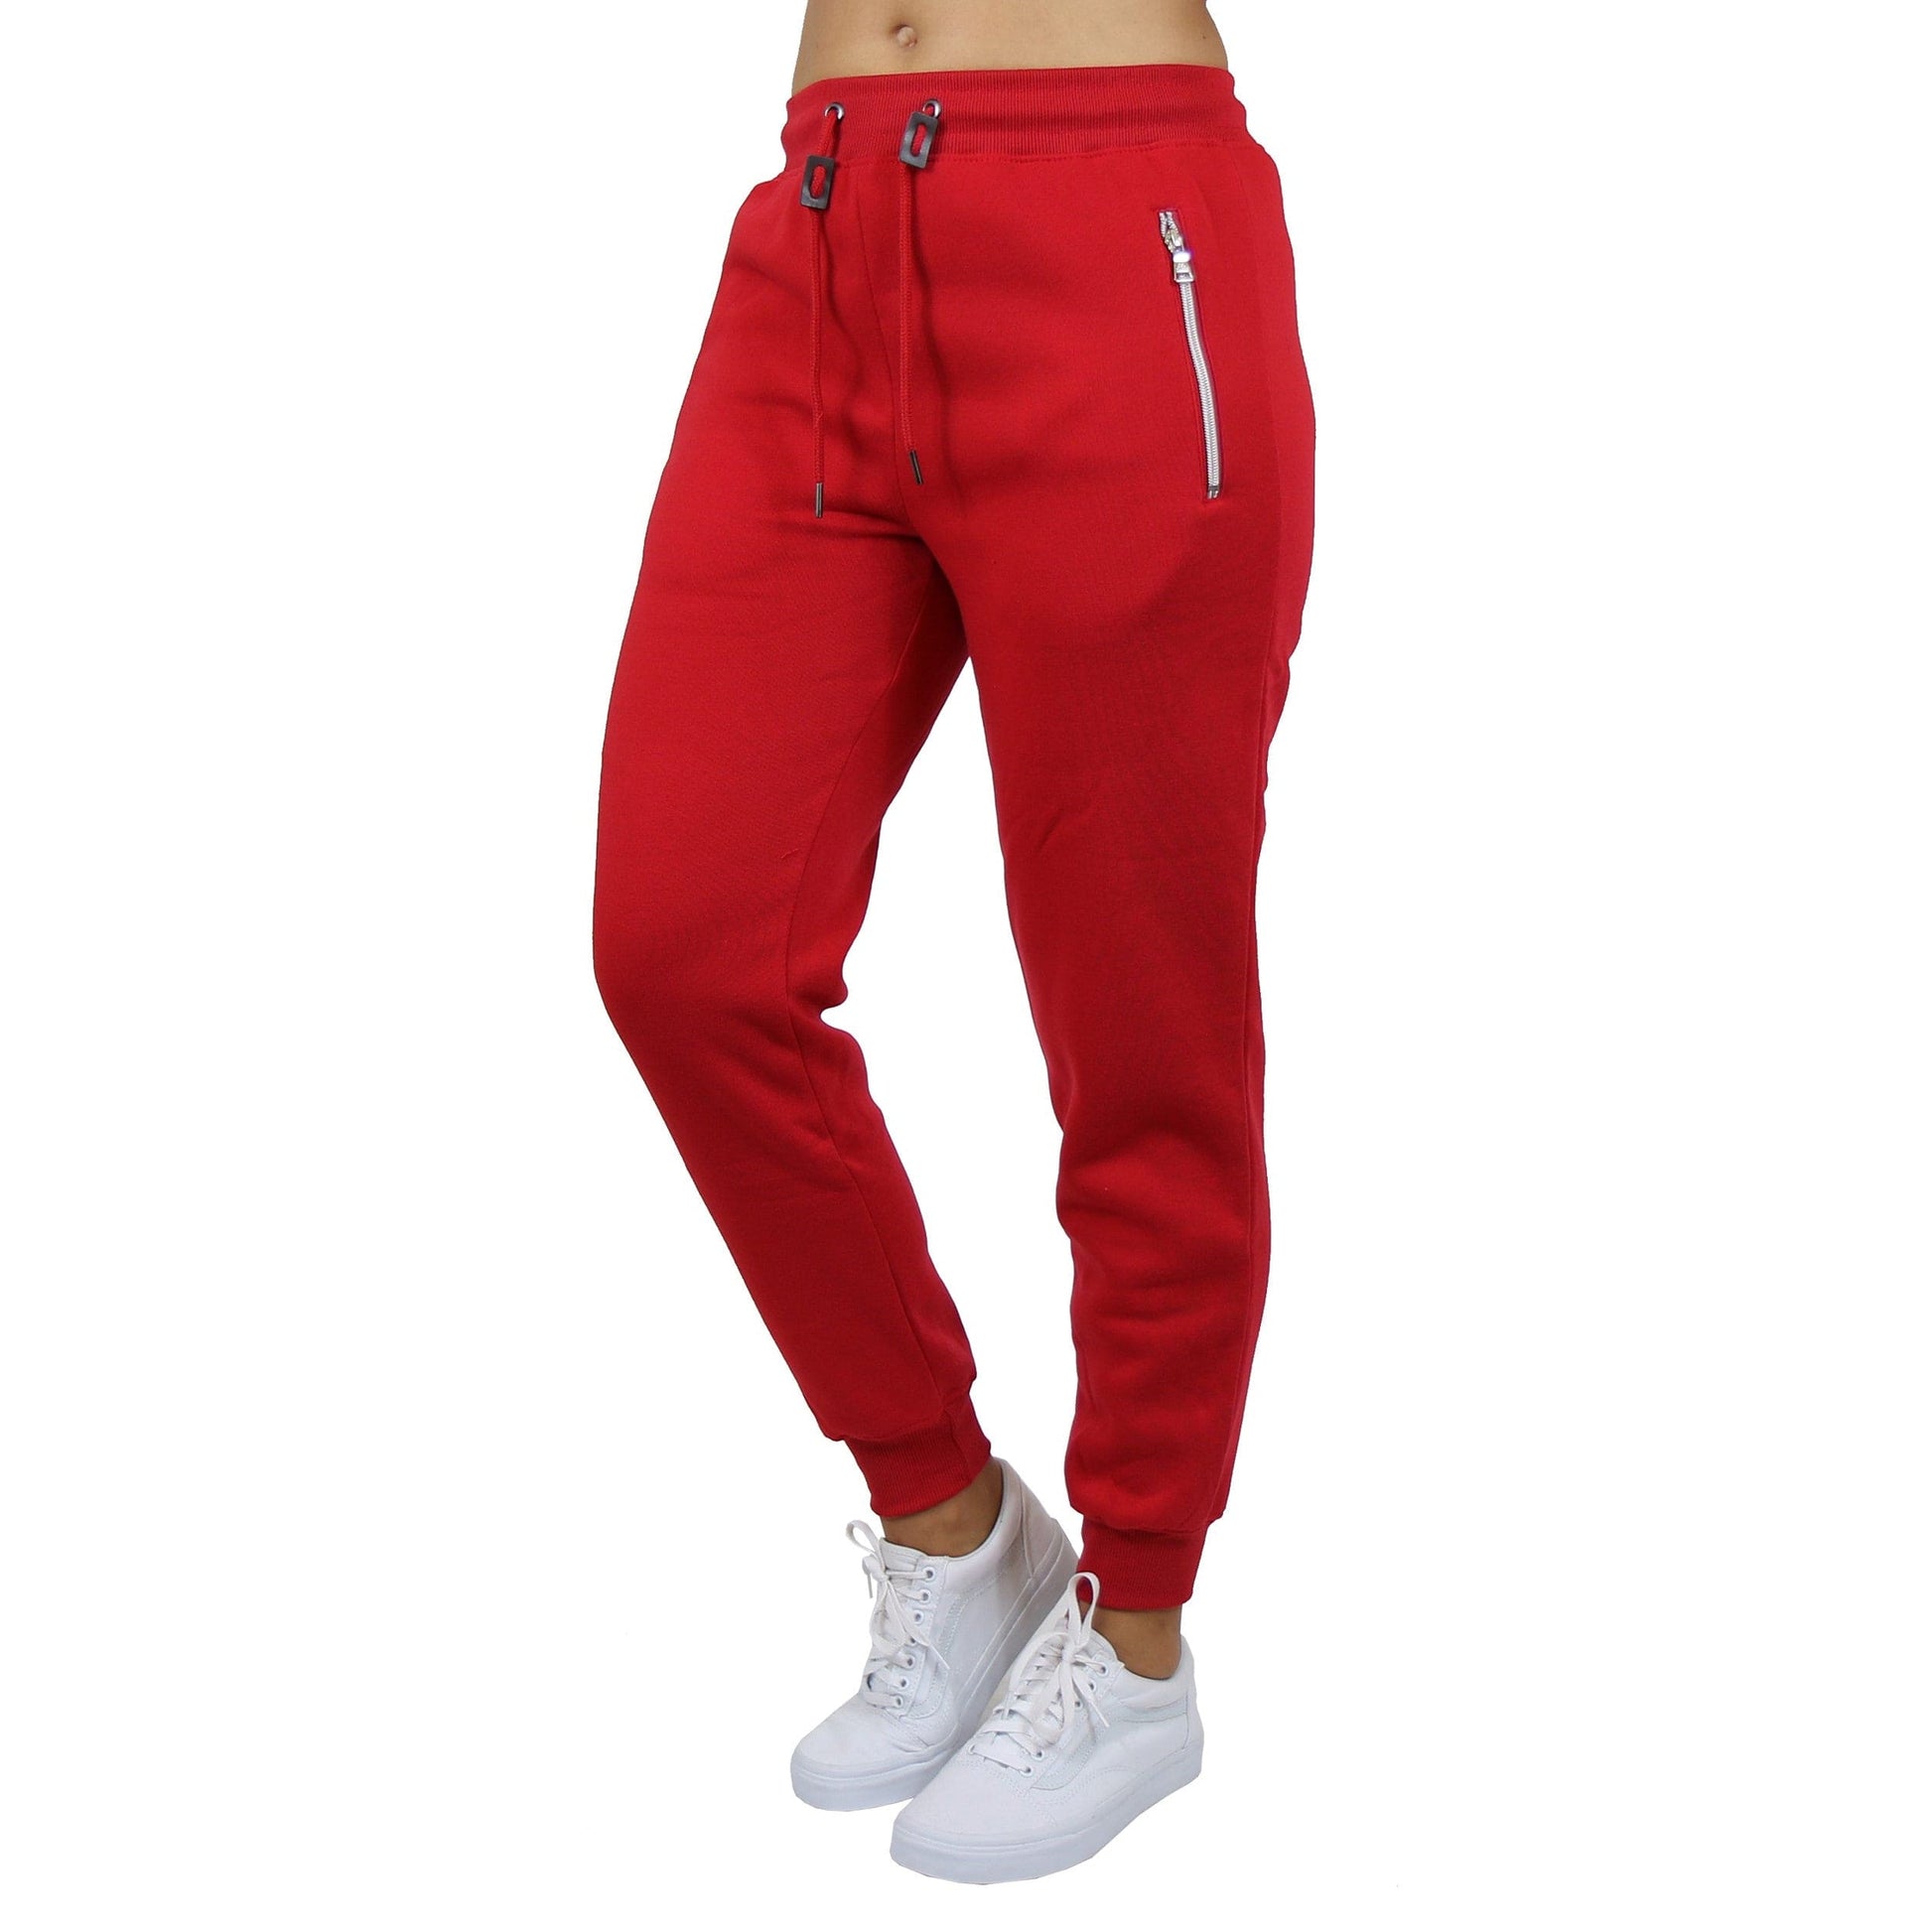 Women's Galaxy by Harvic Loose-Fit Fleece Joggers (S-2XL)